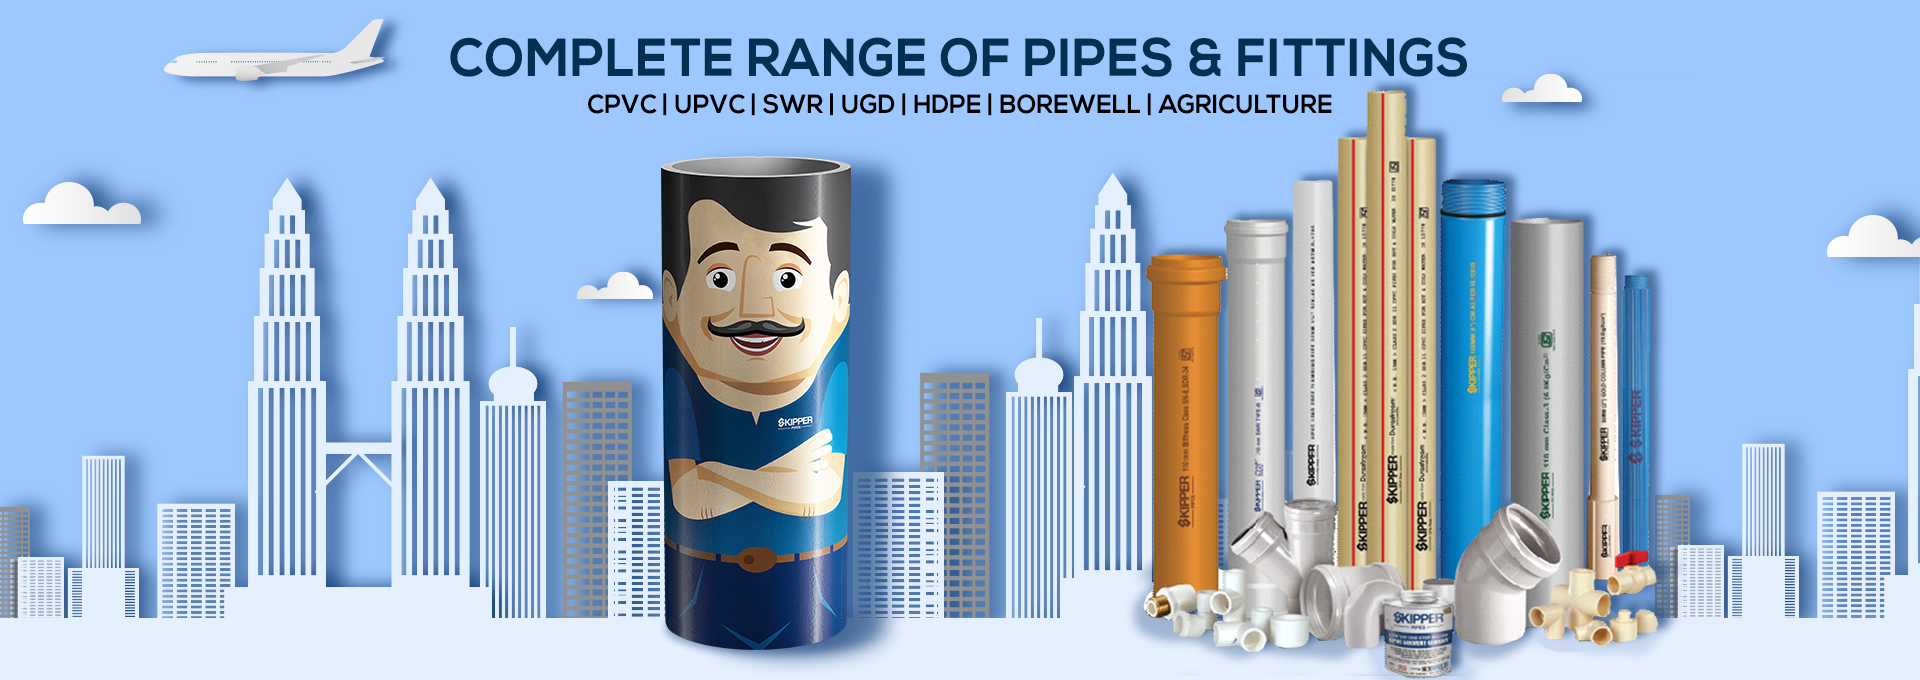 Pipes Products - Skipper Pipes